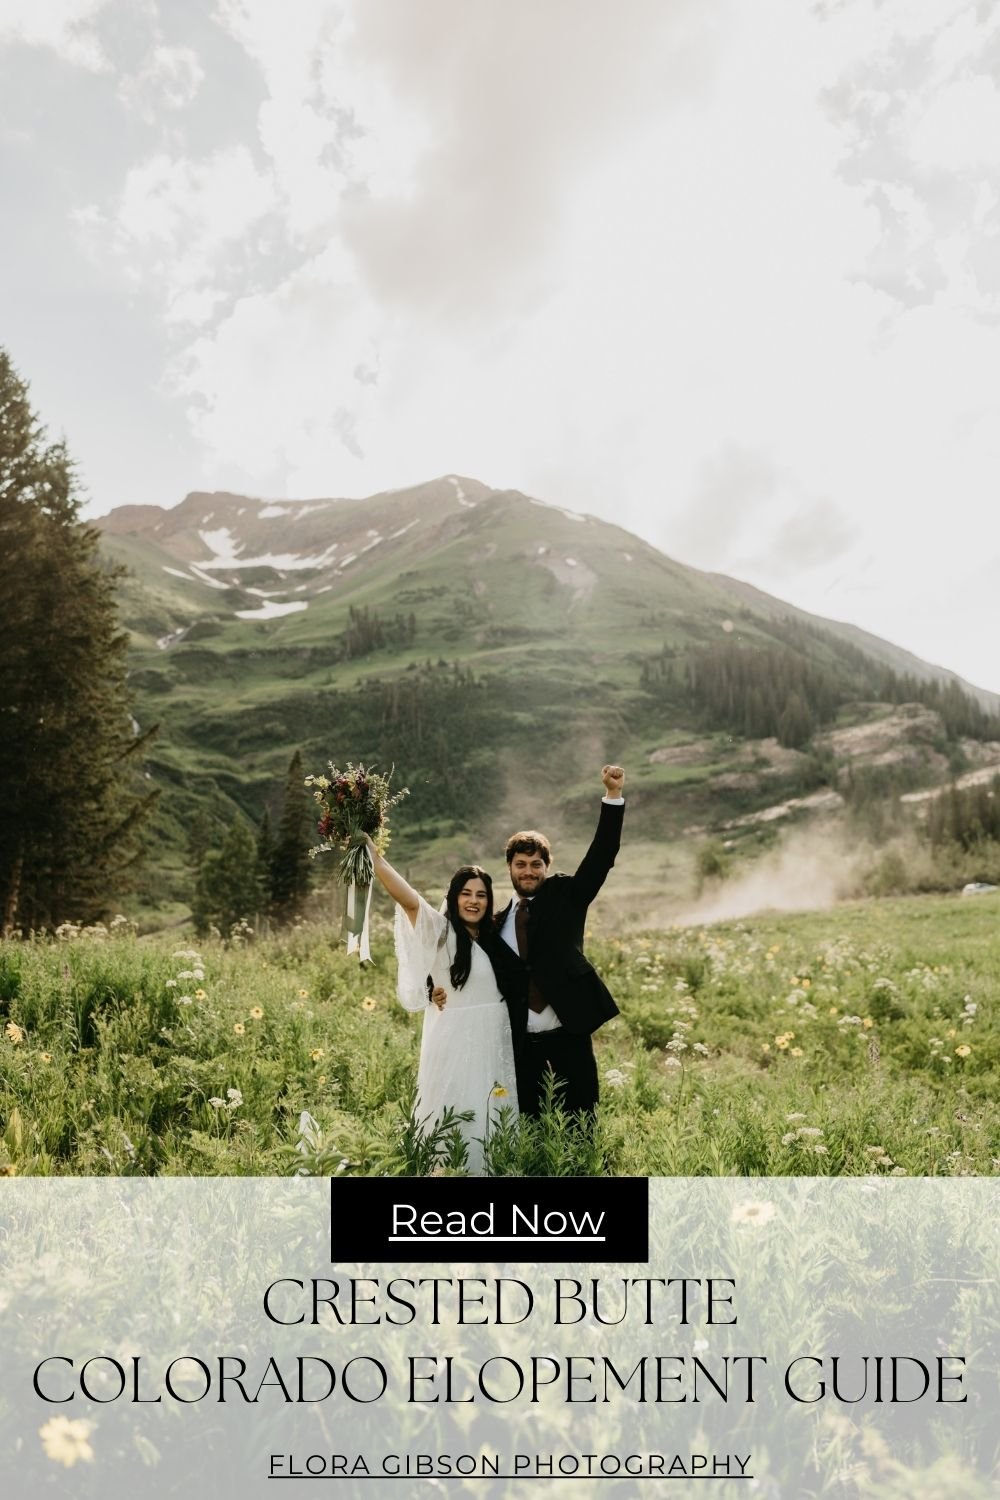 Crested Butte Colorado Elopement Guide.jpg